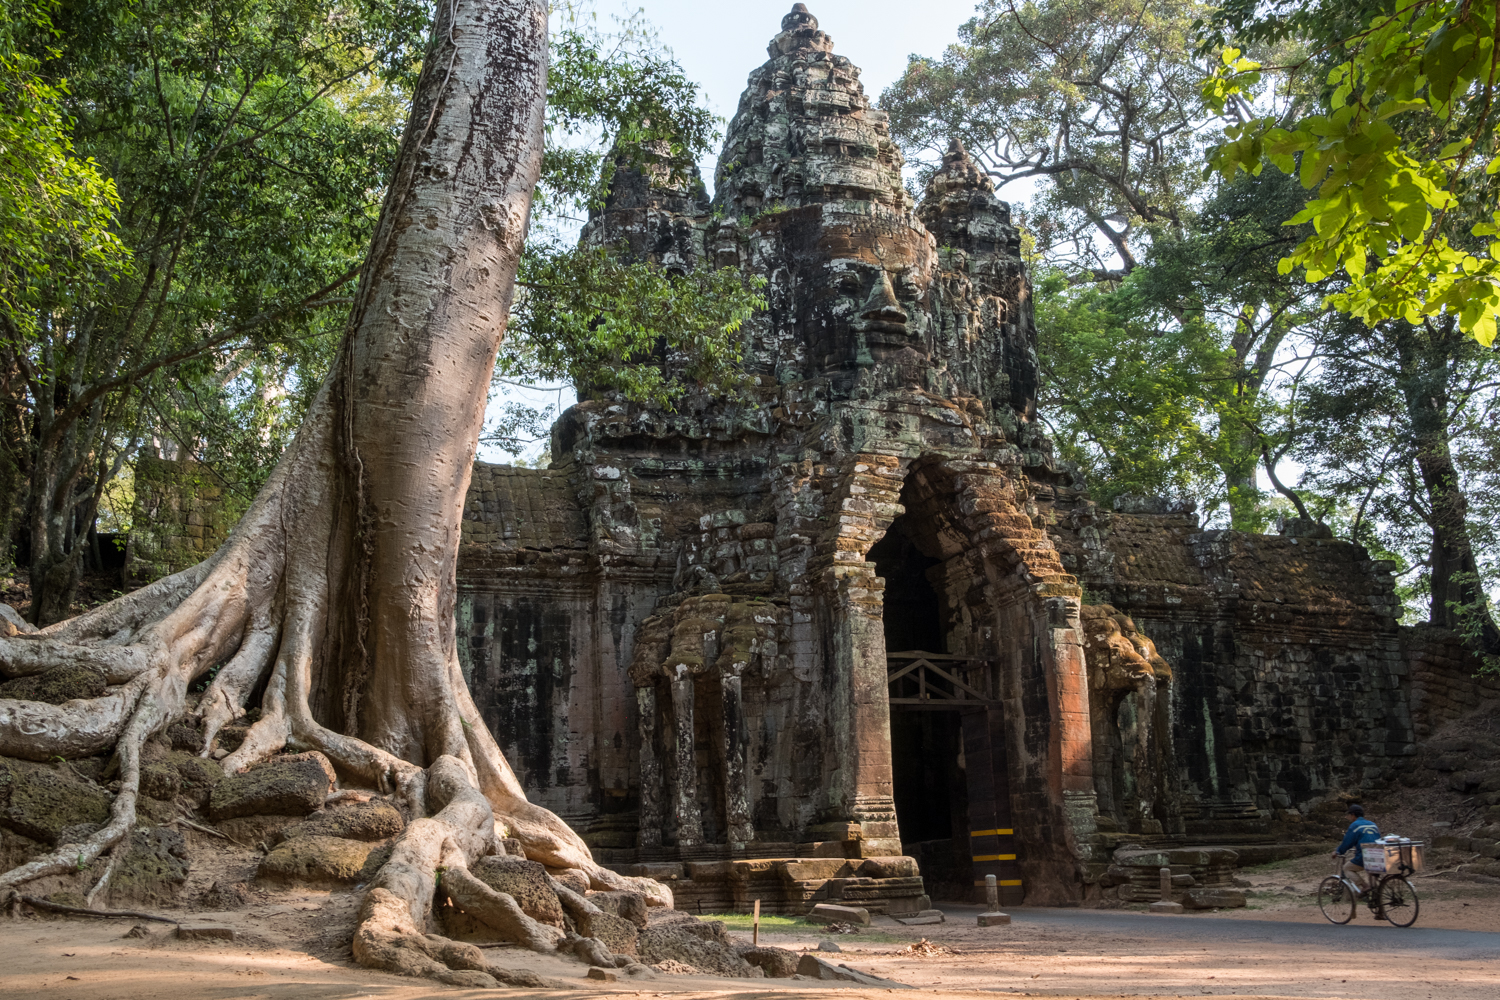  A cyclist rides through the majestic scenery and entrance gate to the Angkor temple complex. 